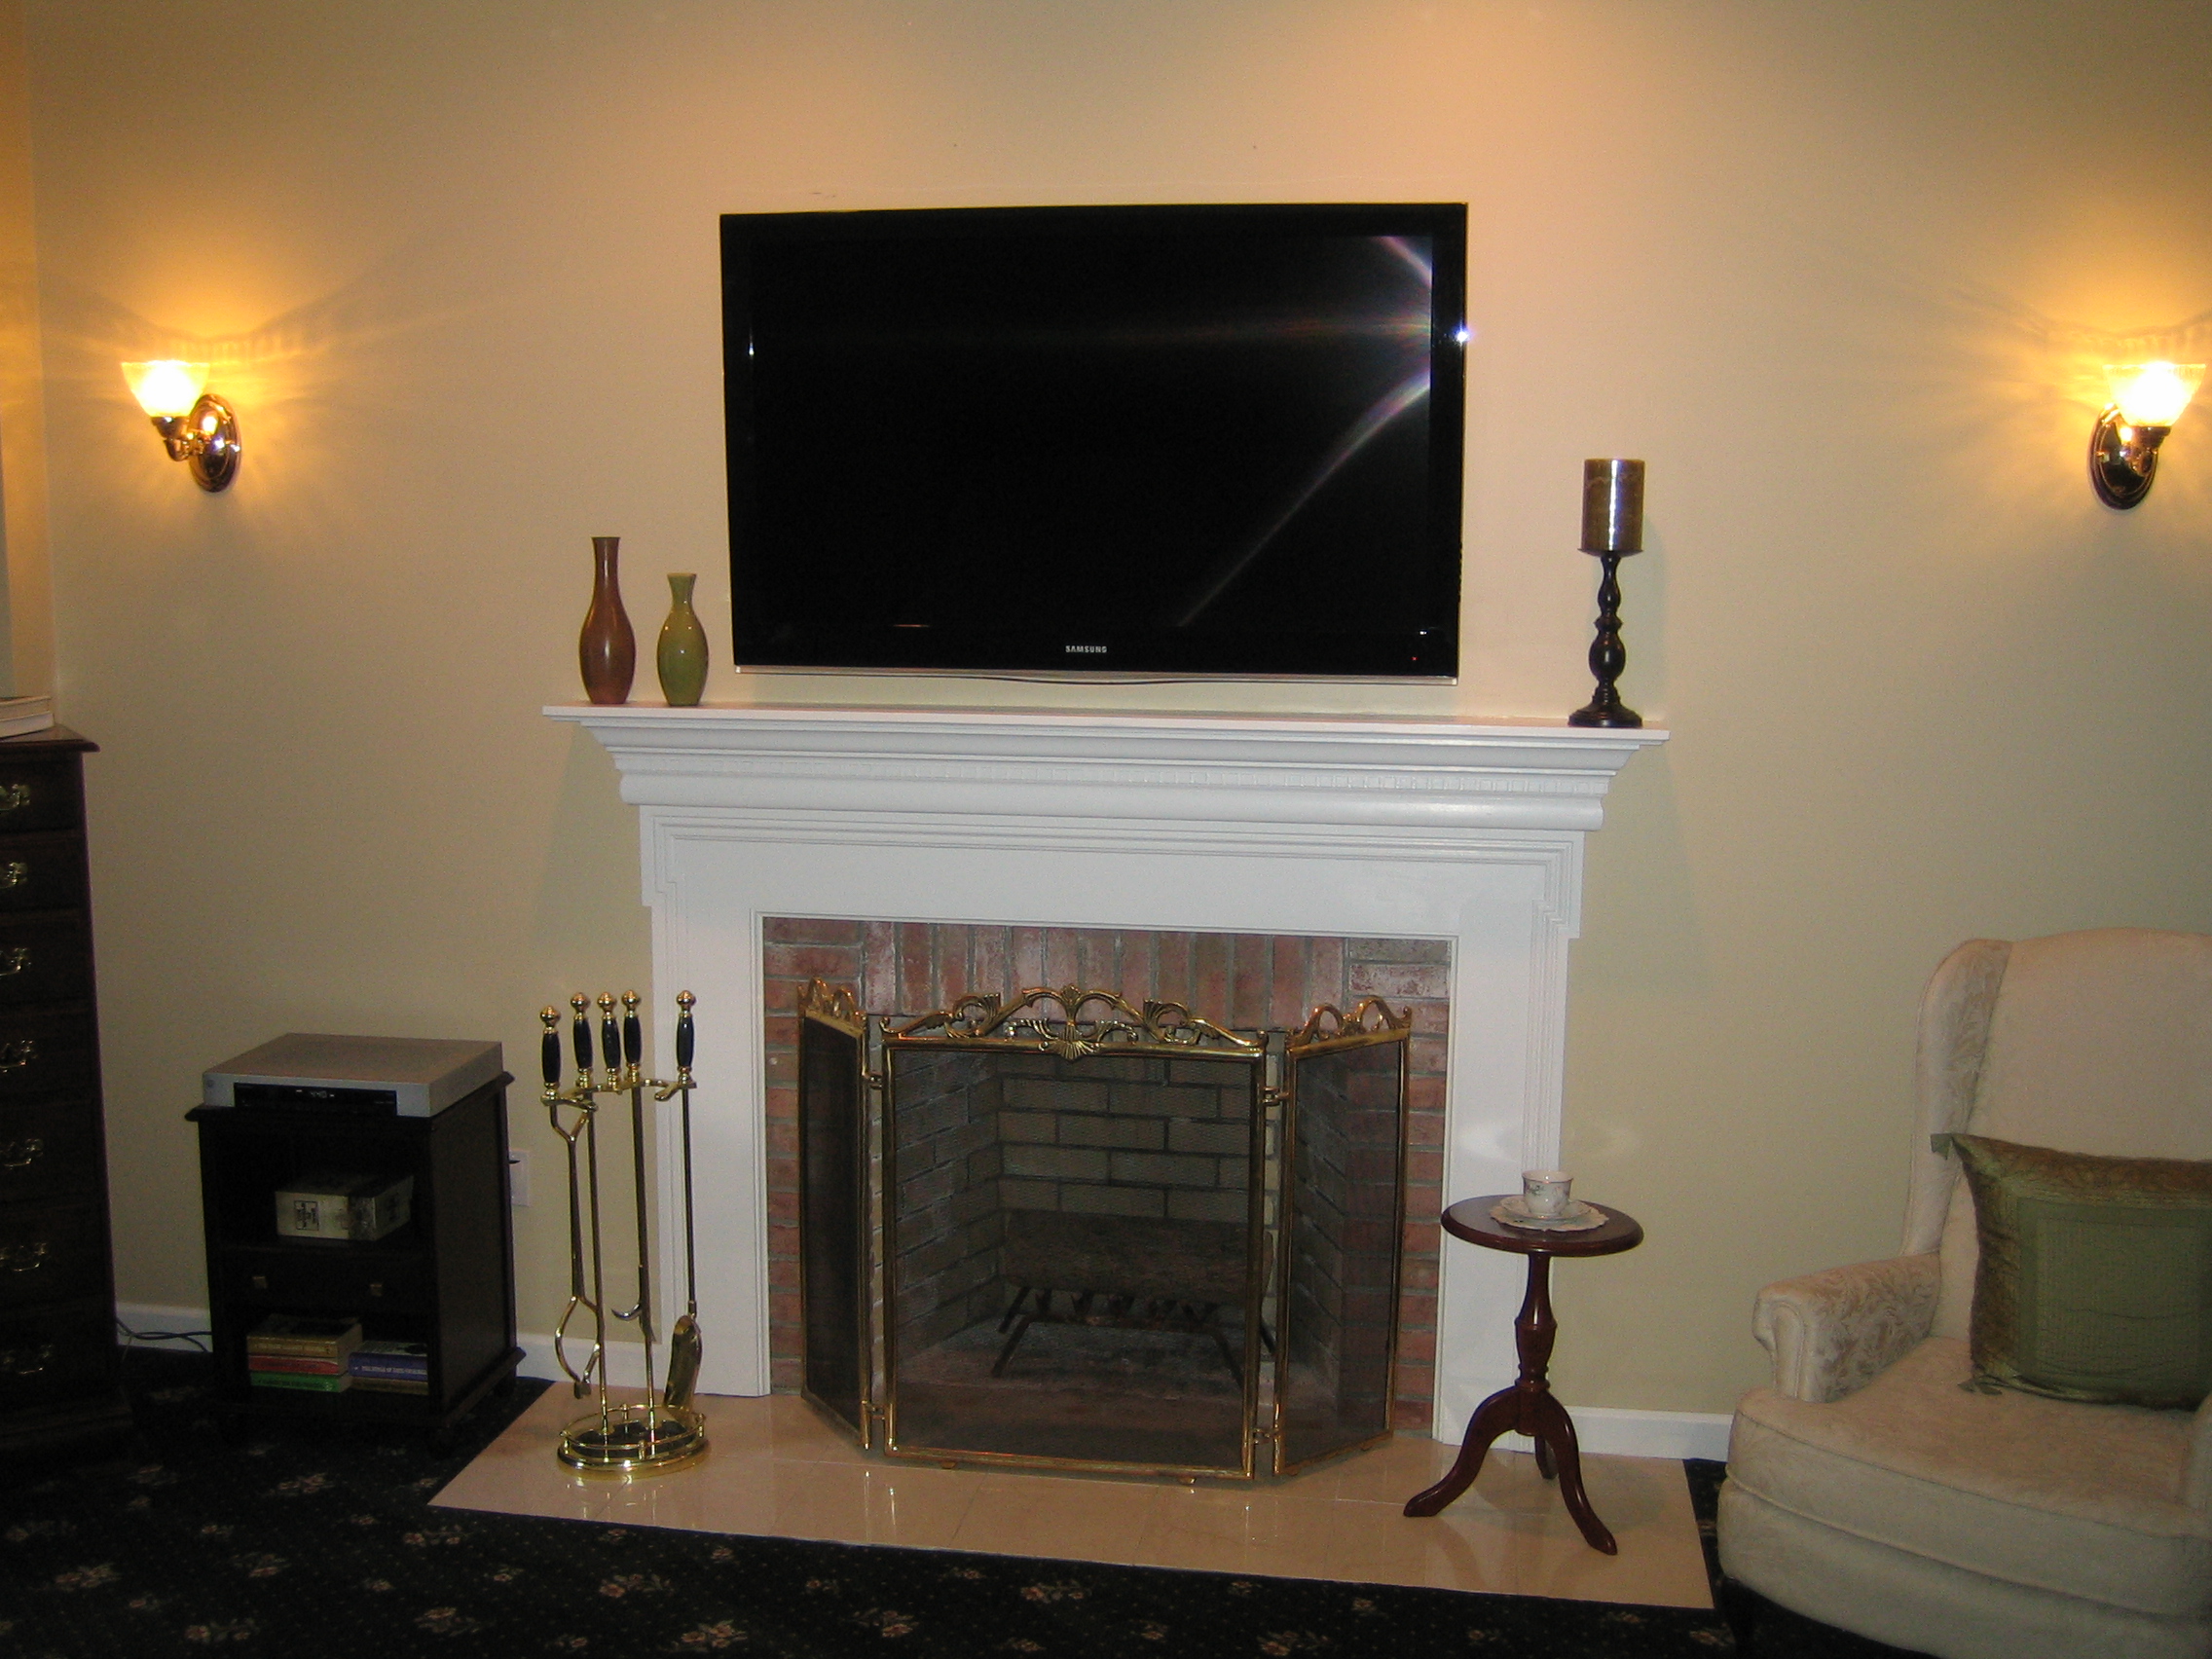 How to Mount Tv Above Fireplace Elegant Installing Tv Above Fireplace Charming Fireplace